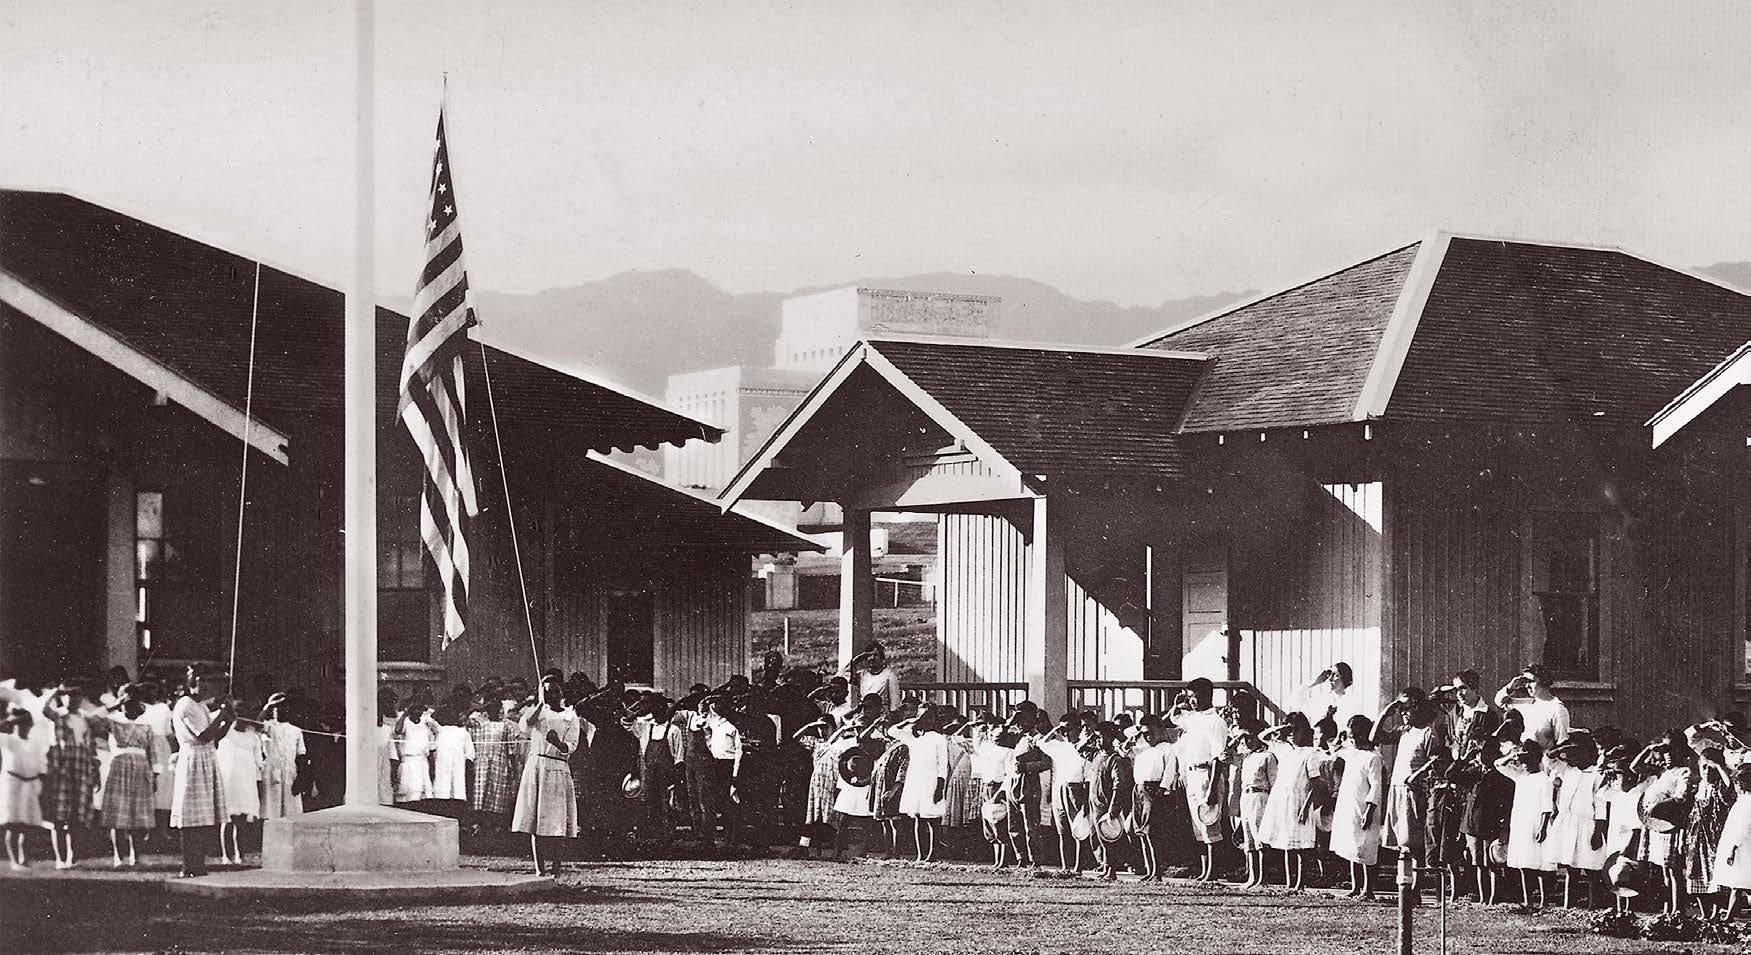 In 1921, while attending a flag-raising ceremony at the primary school just down the hill from the temple, Elder David O. McKay “envisioned a temple of learning to complement the House of the Lord.” Over three decades later this vision became the Church College of Hawaii (later renamed BYU–Hawaii). Courtesy of BYU–Hawaii Archives.